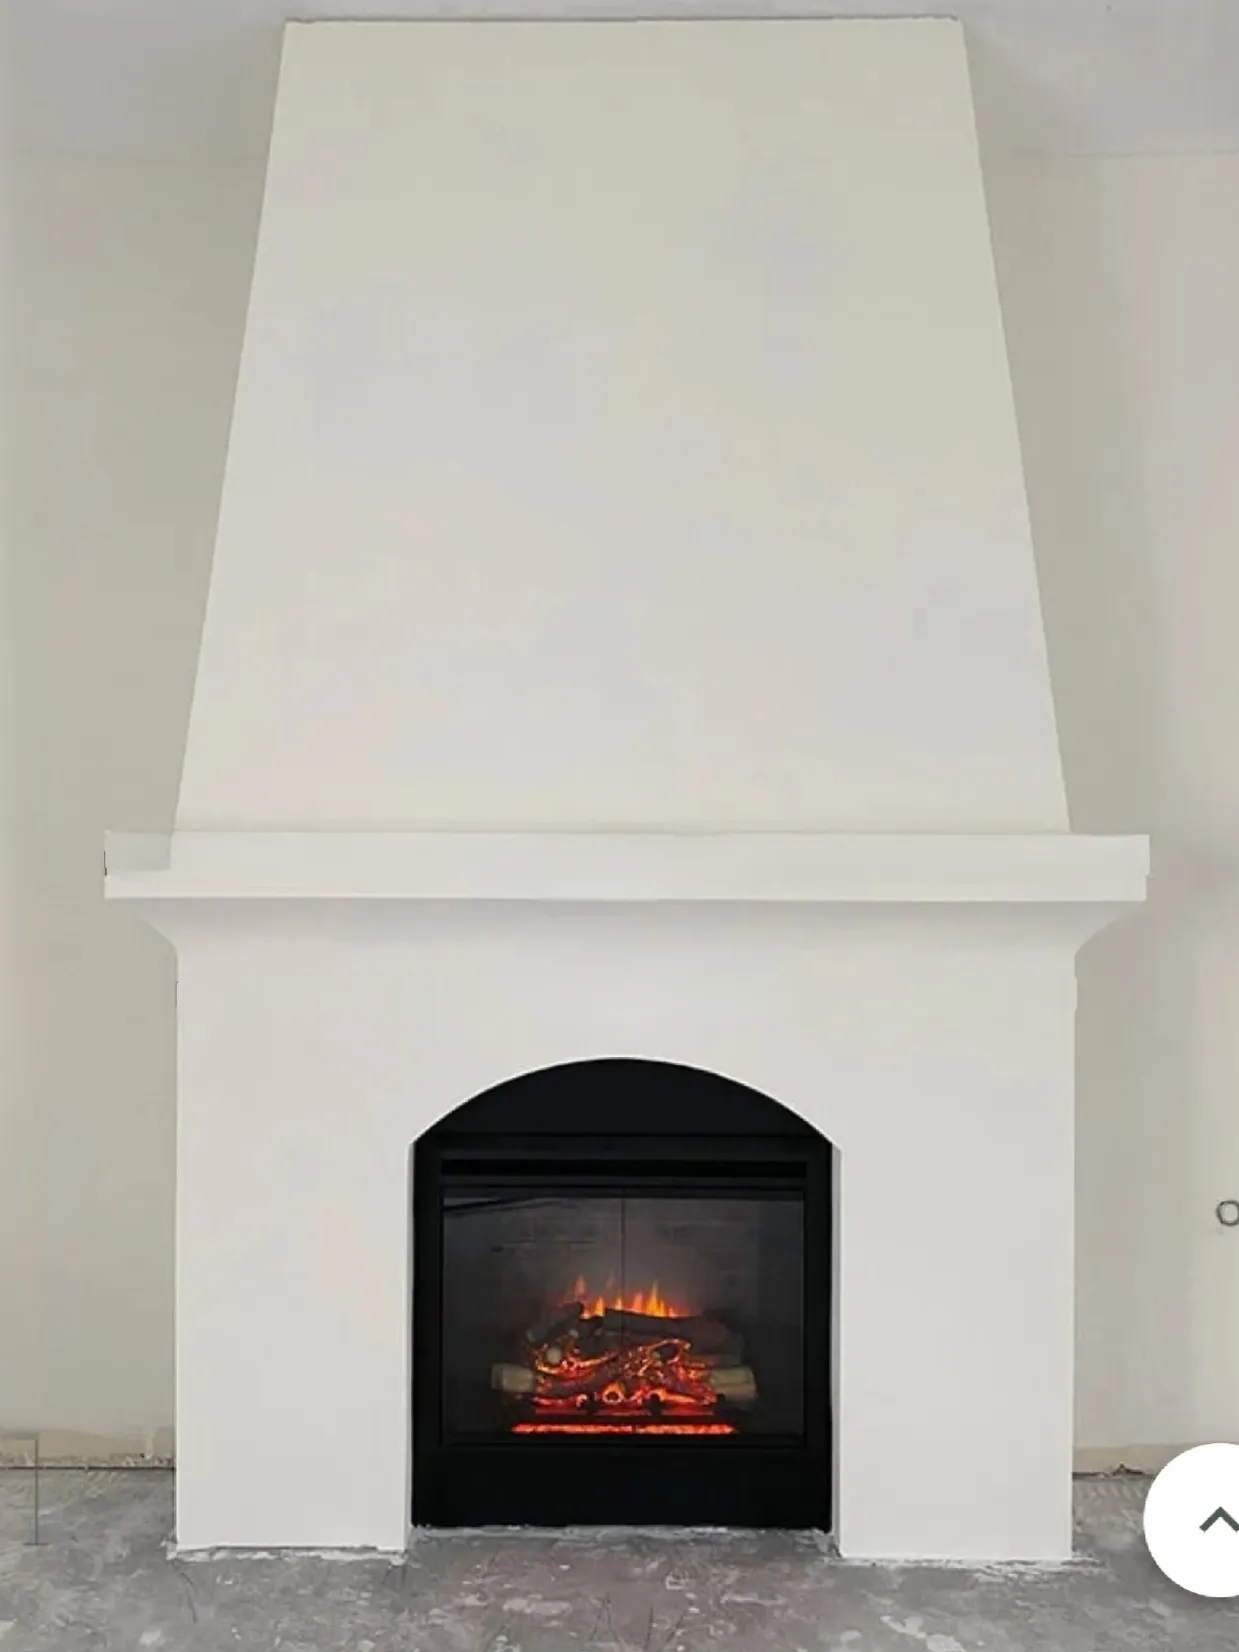 Painted Brick Wood Stove Fireplace - Just Call Me Homegirl